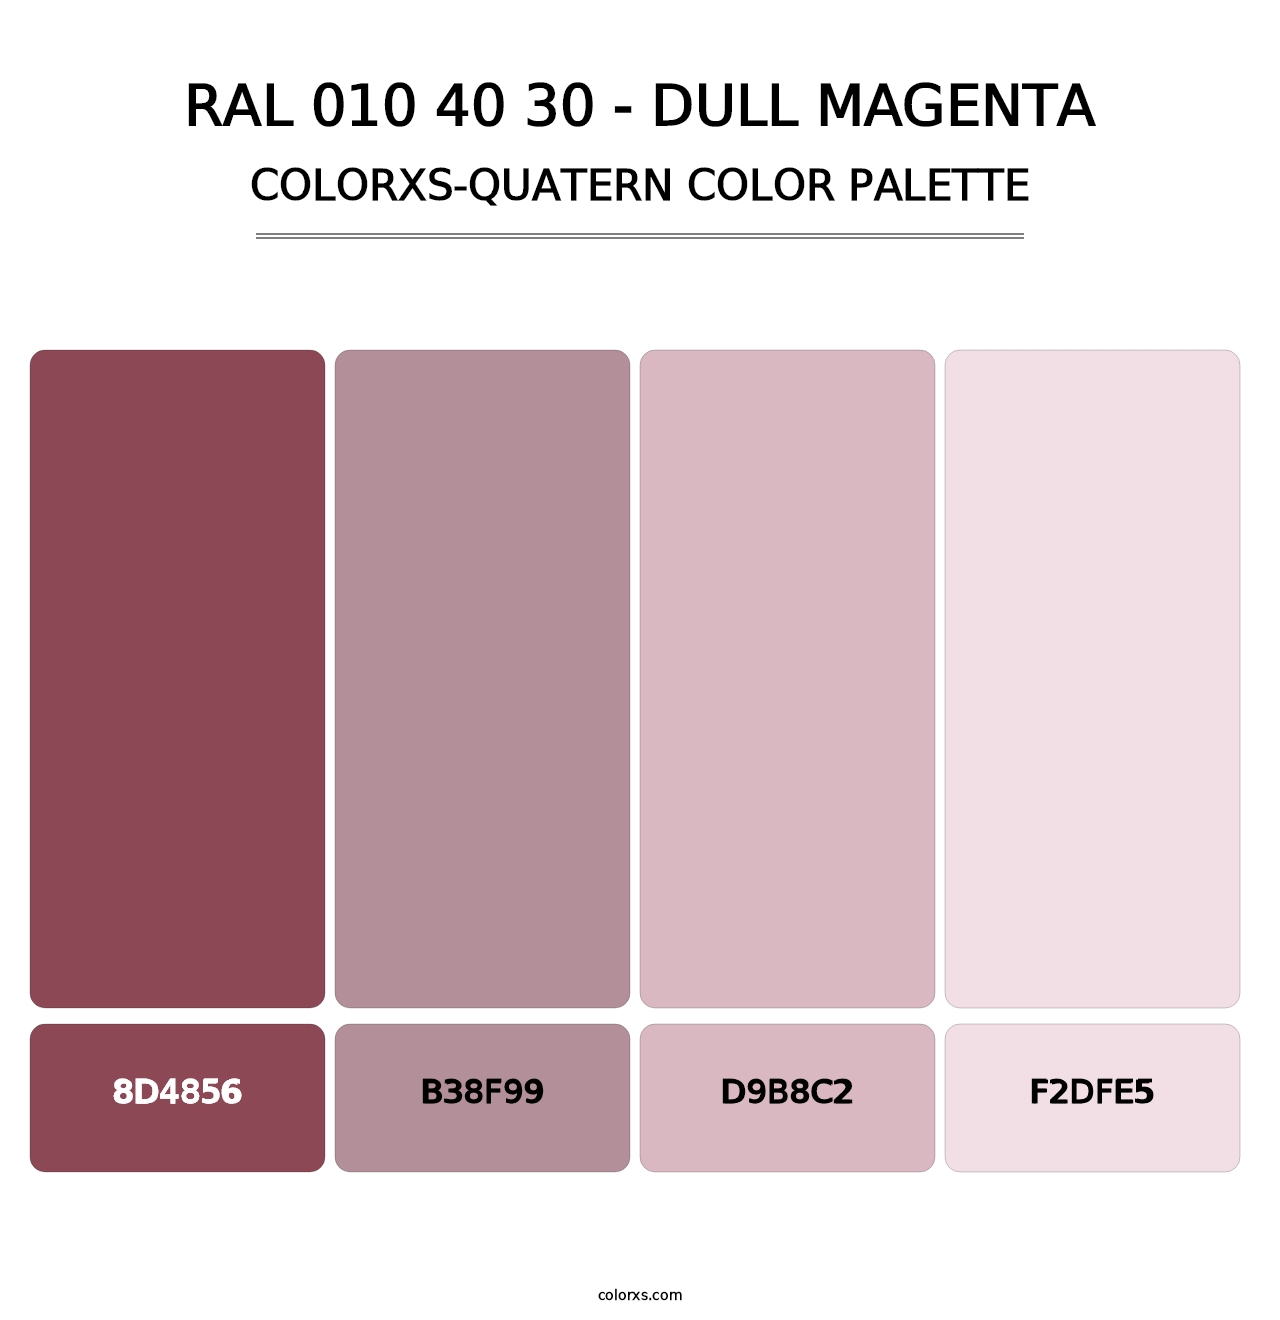 RAL 010 40 30 - Dull Magenta - Colorxs Quatern Palette